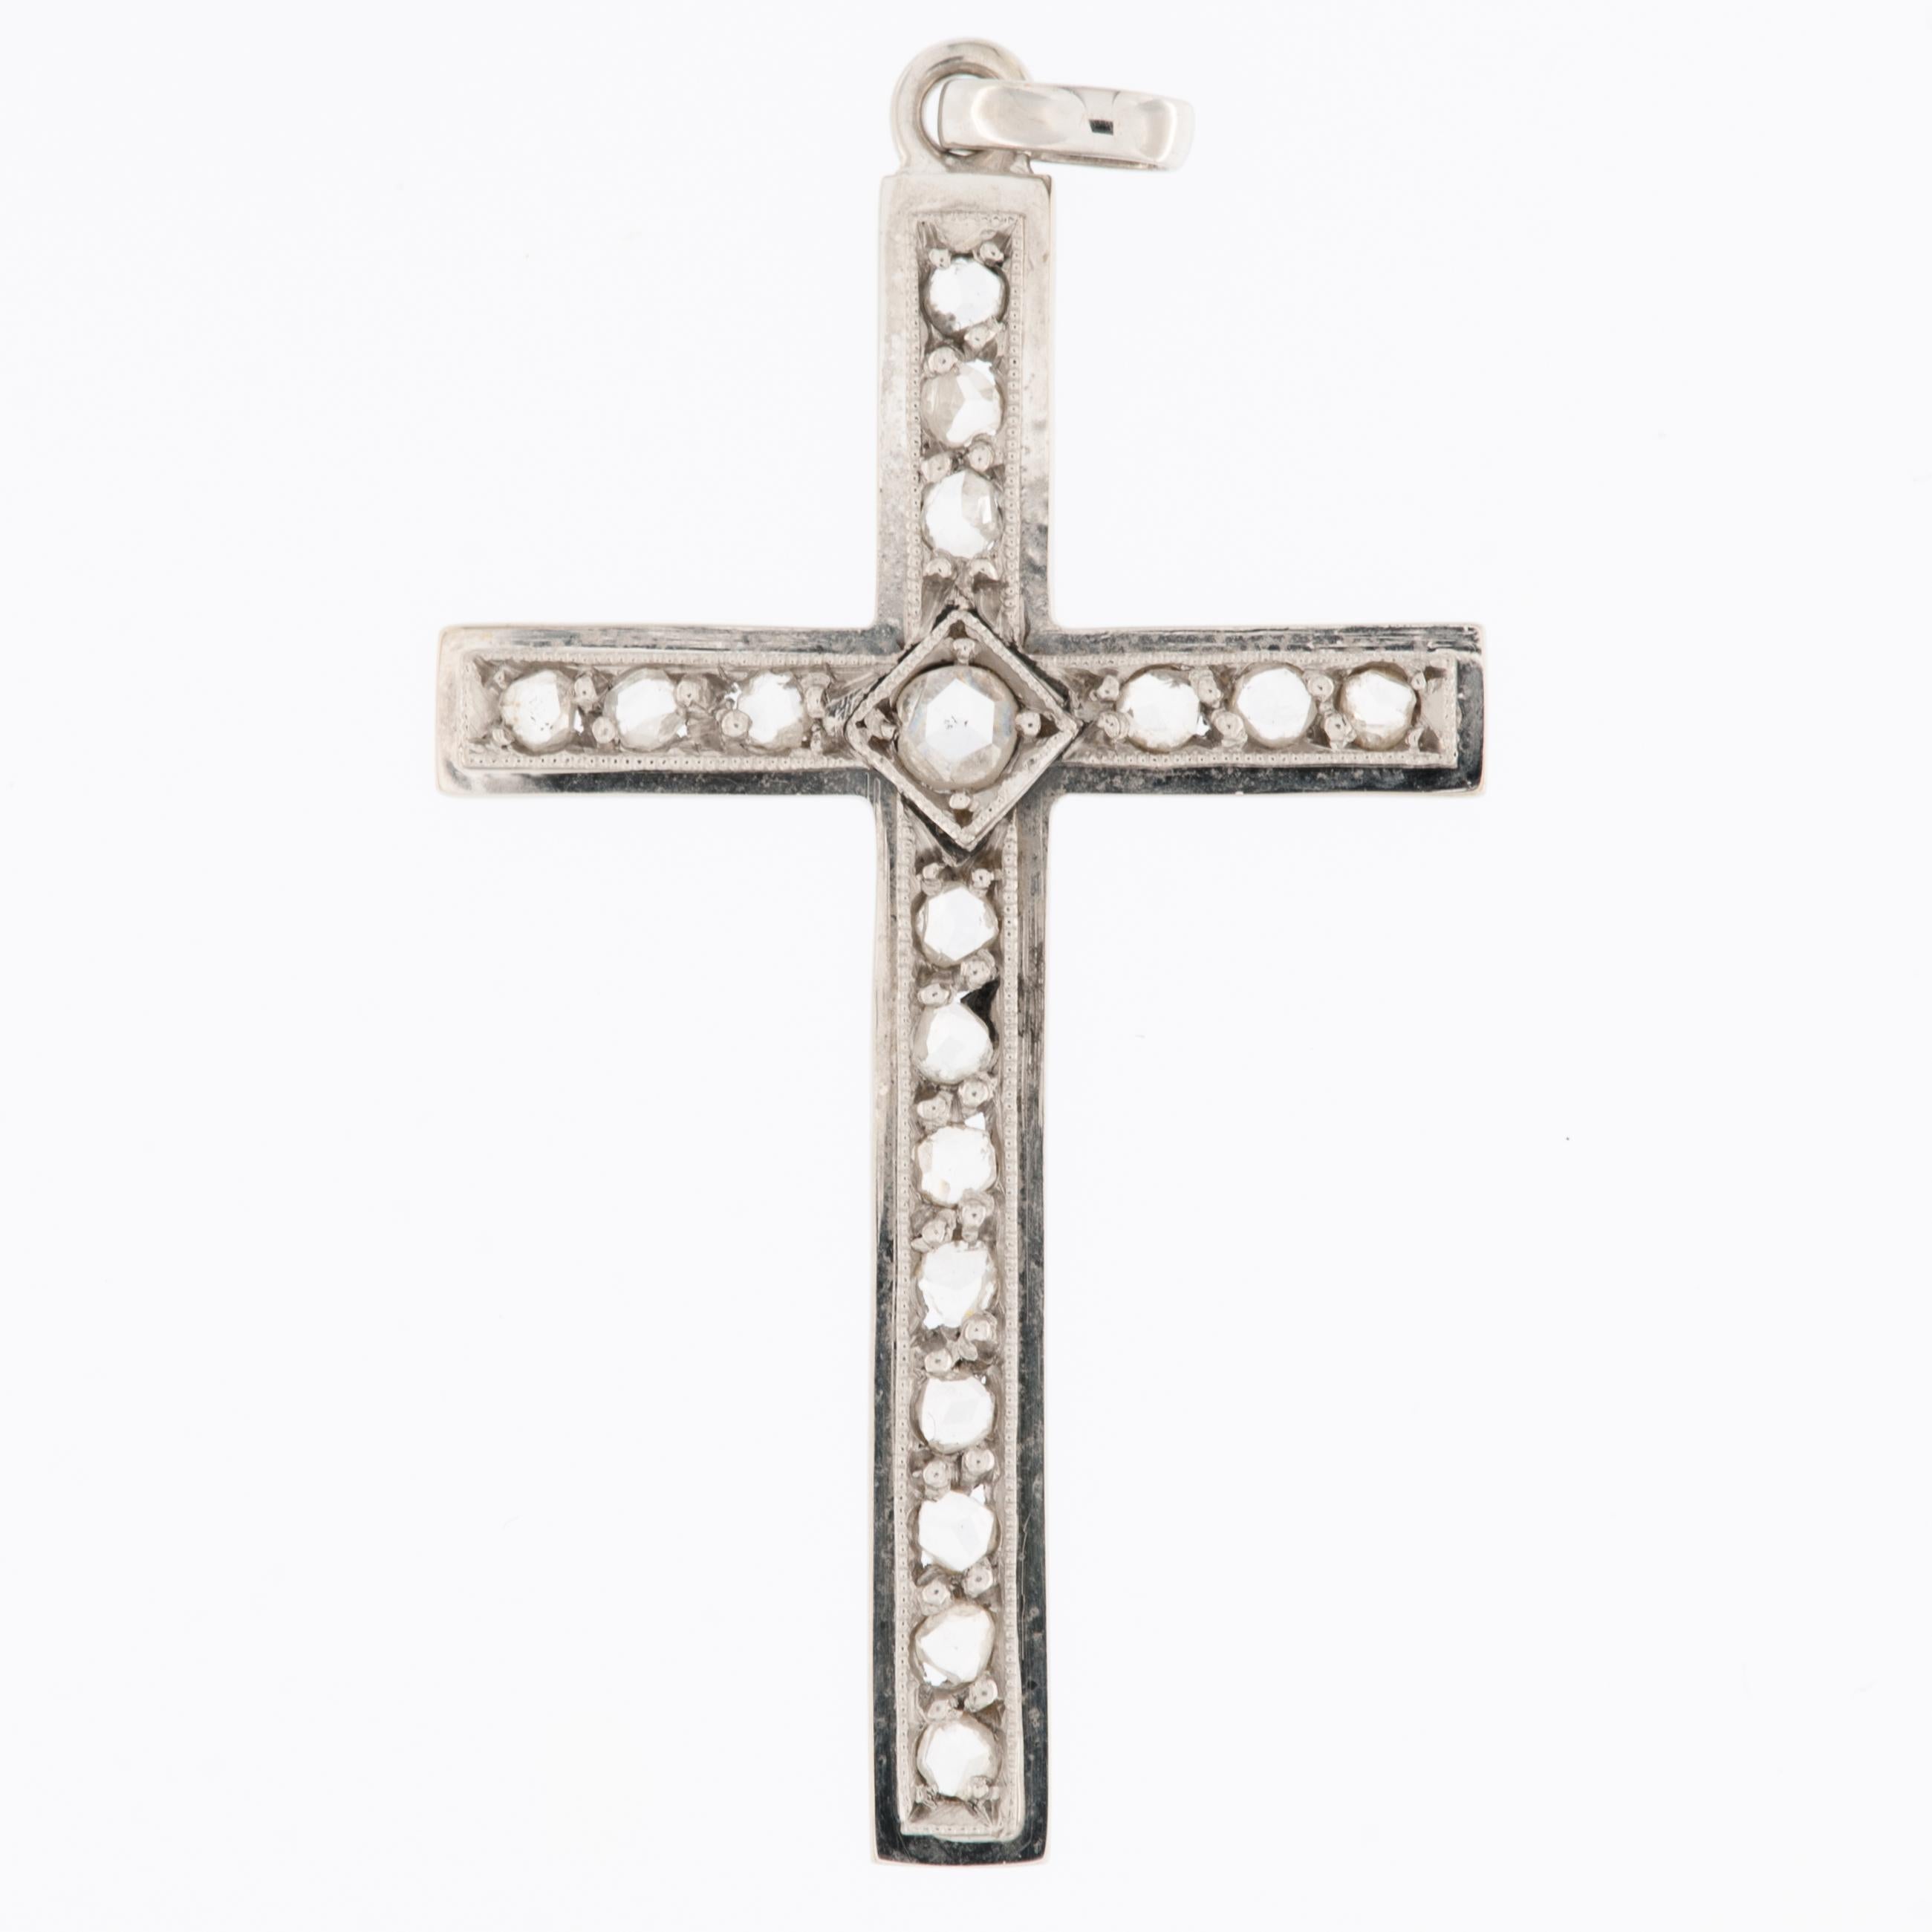 The Retro Swiss 18kt White Gold Cross with Diamonds featuring old-cut diamonds is a piece of jewelry that combines vintage design elements with the timeless beauty of diamonds.

The cross is crafted from 18kt white gold, which is known for its